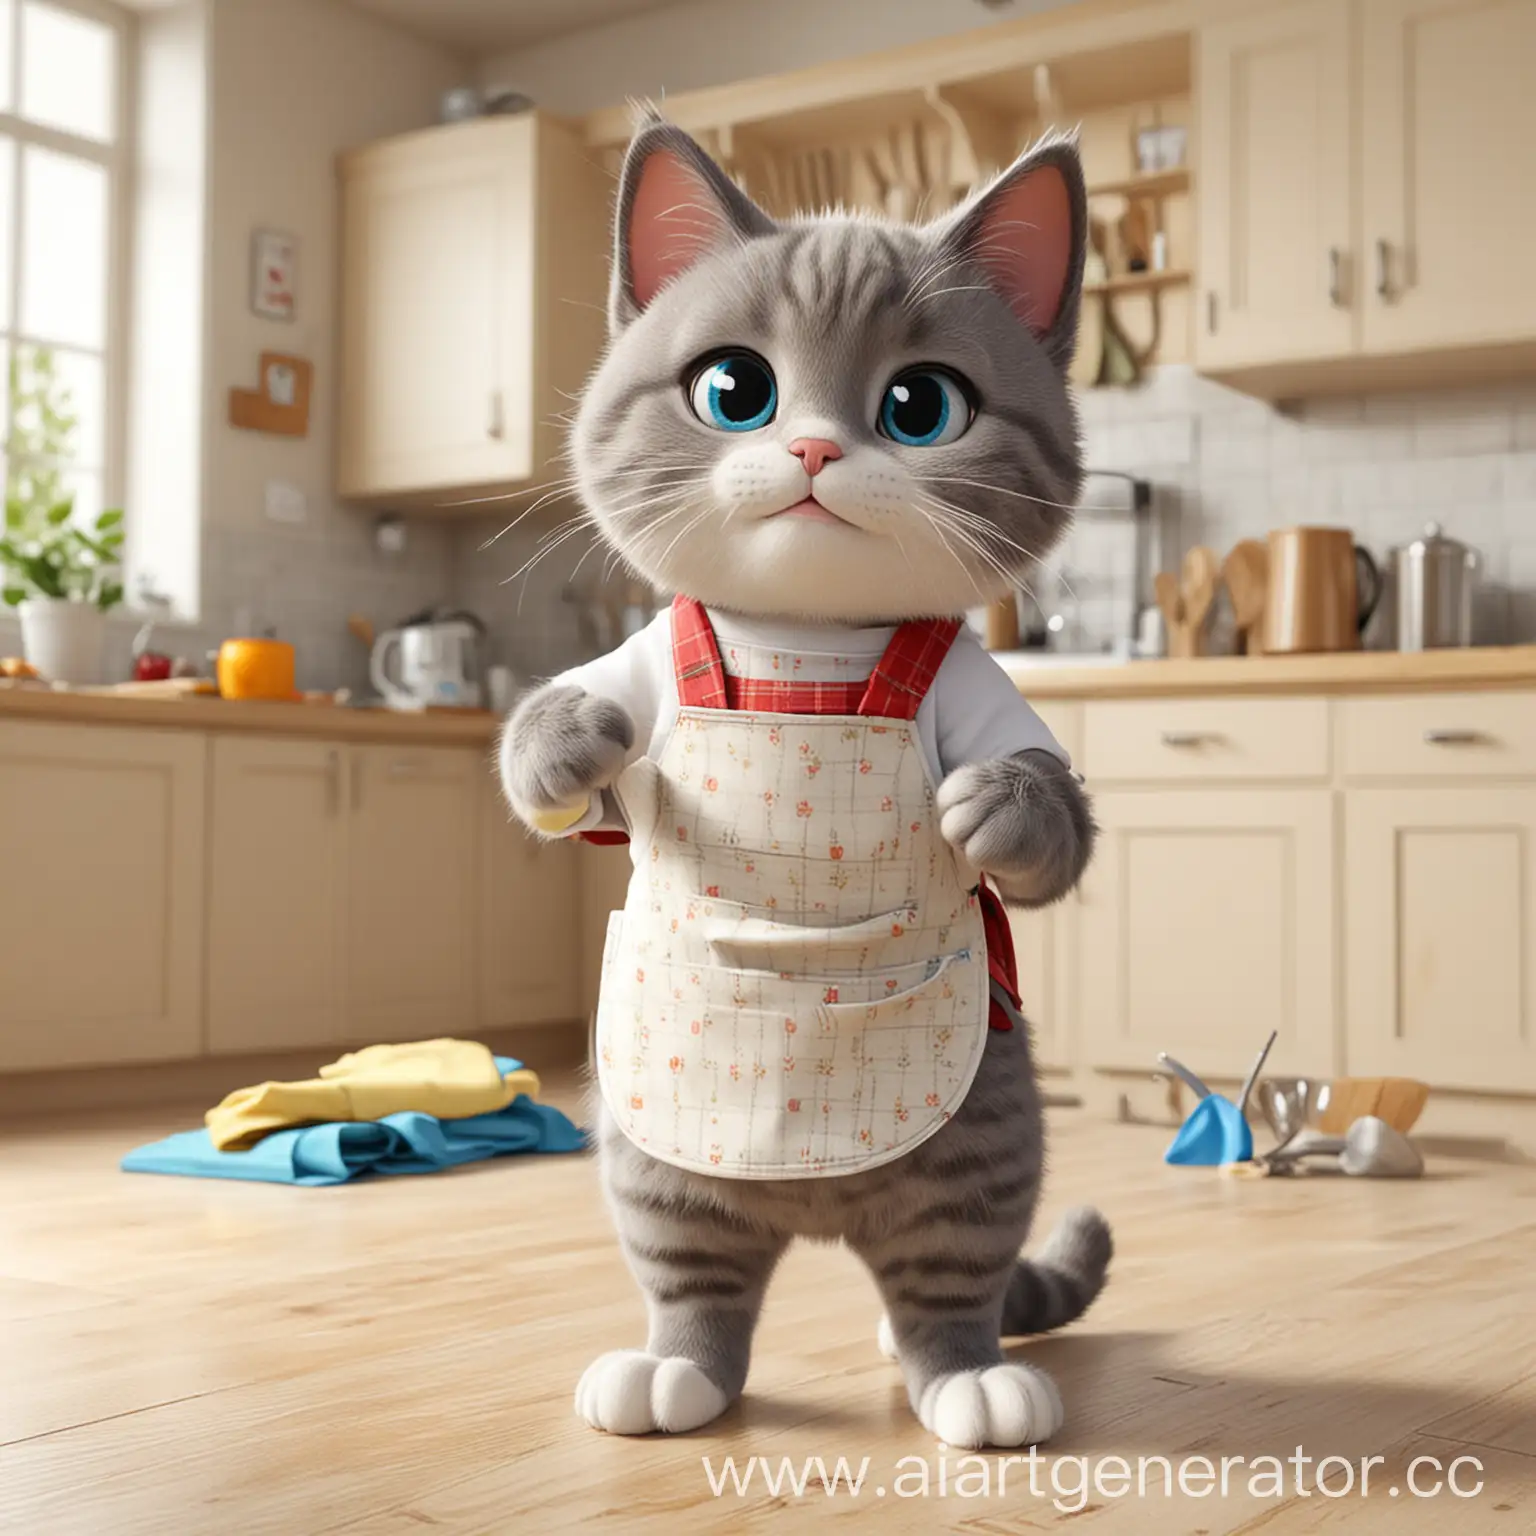 Cartoon-Cat-Cleaning-Kitchen-Adorable-3D-Feline-in-Apron-Tidying-Home